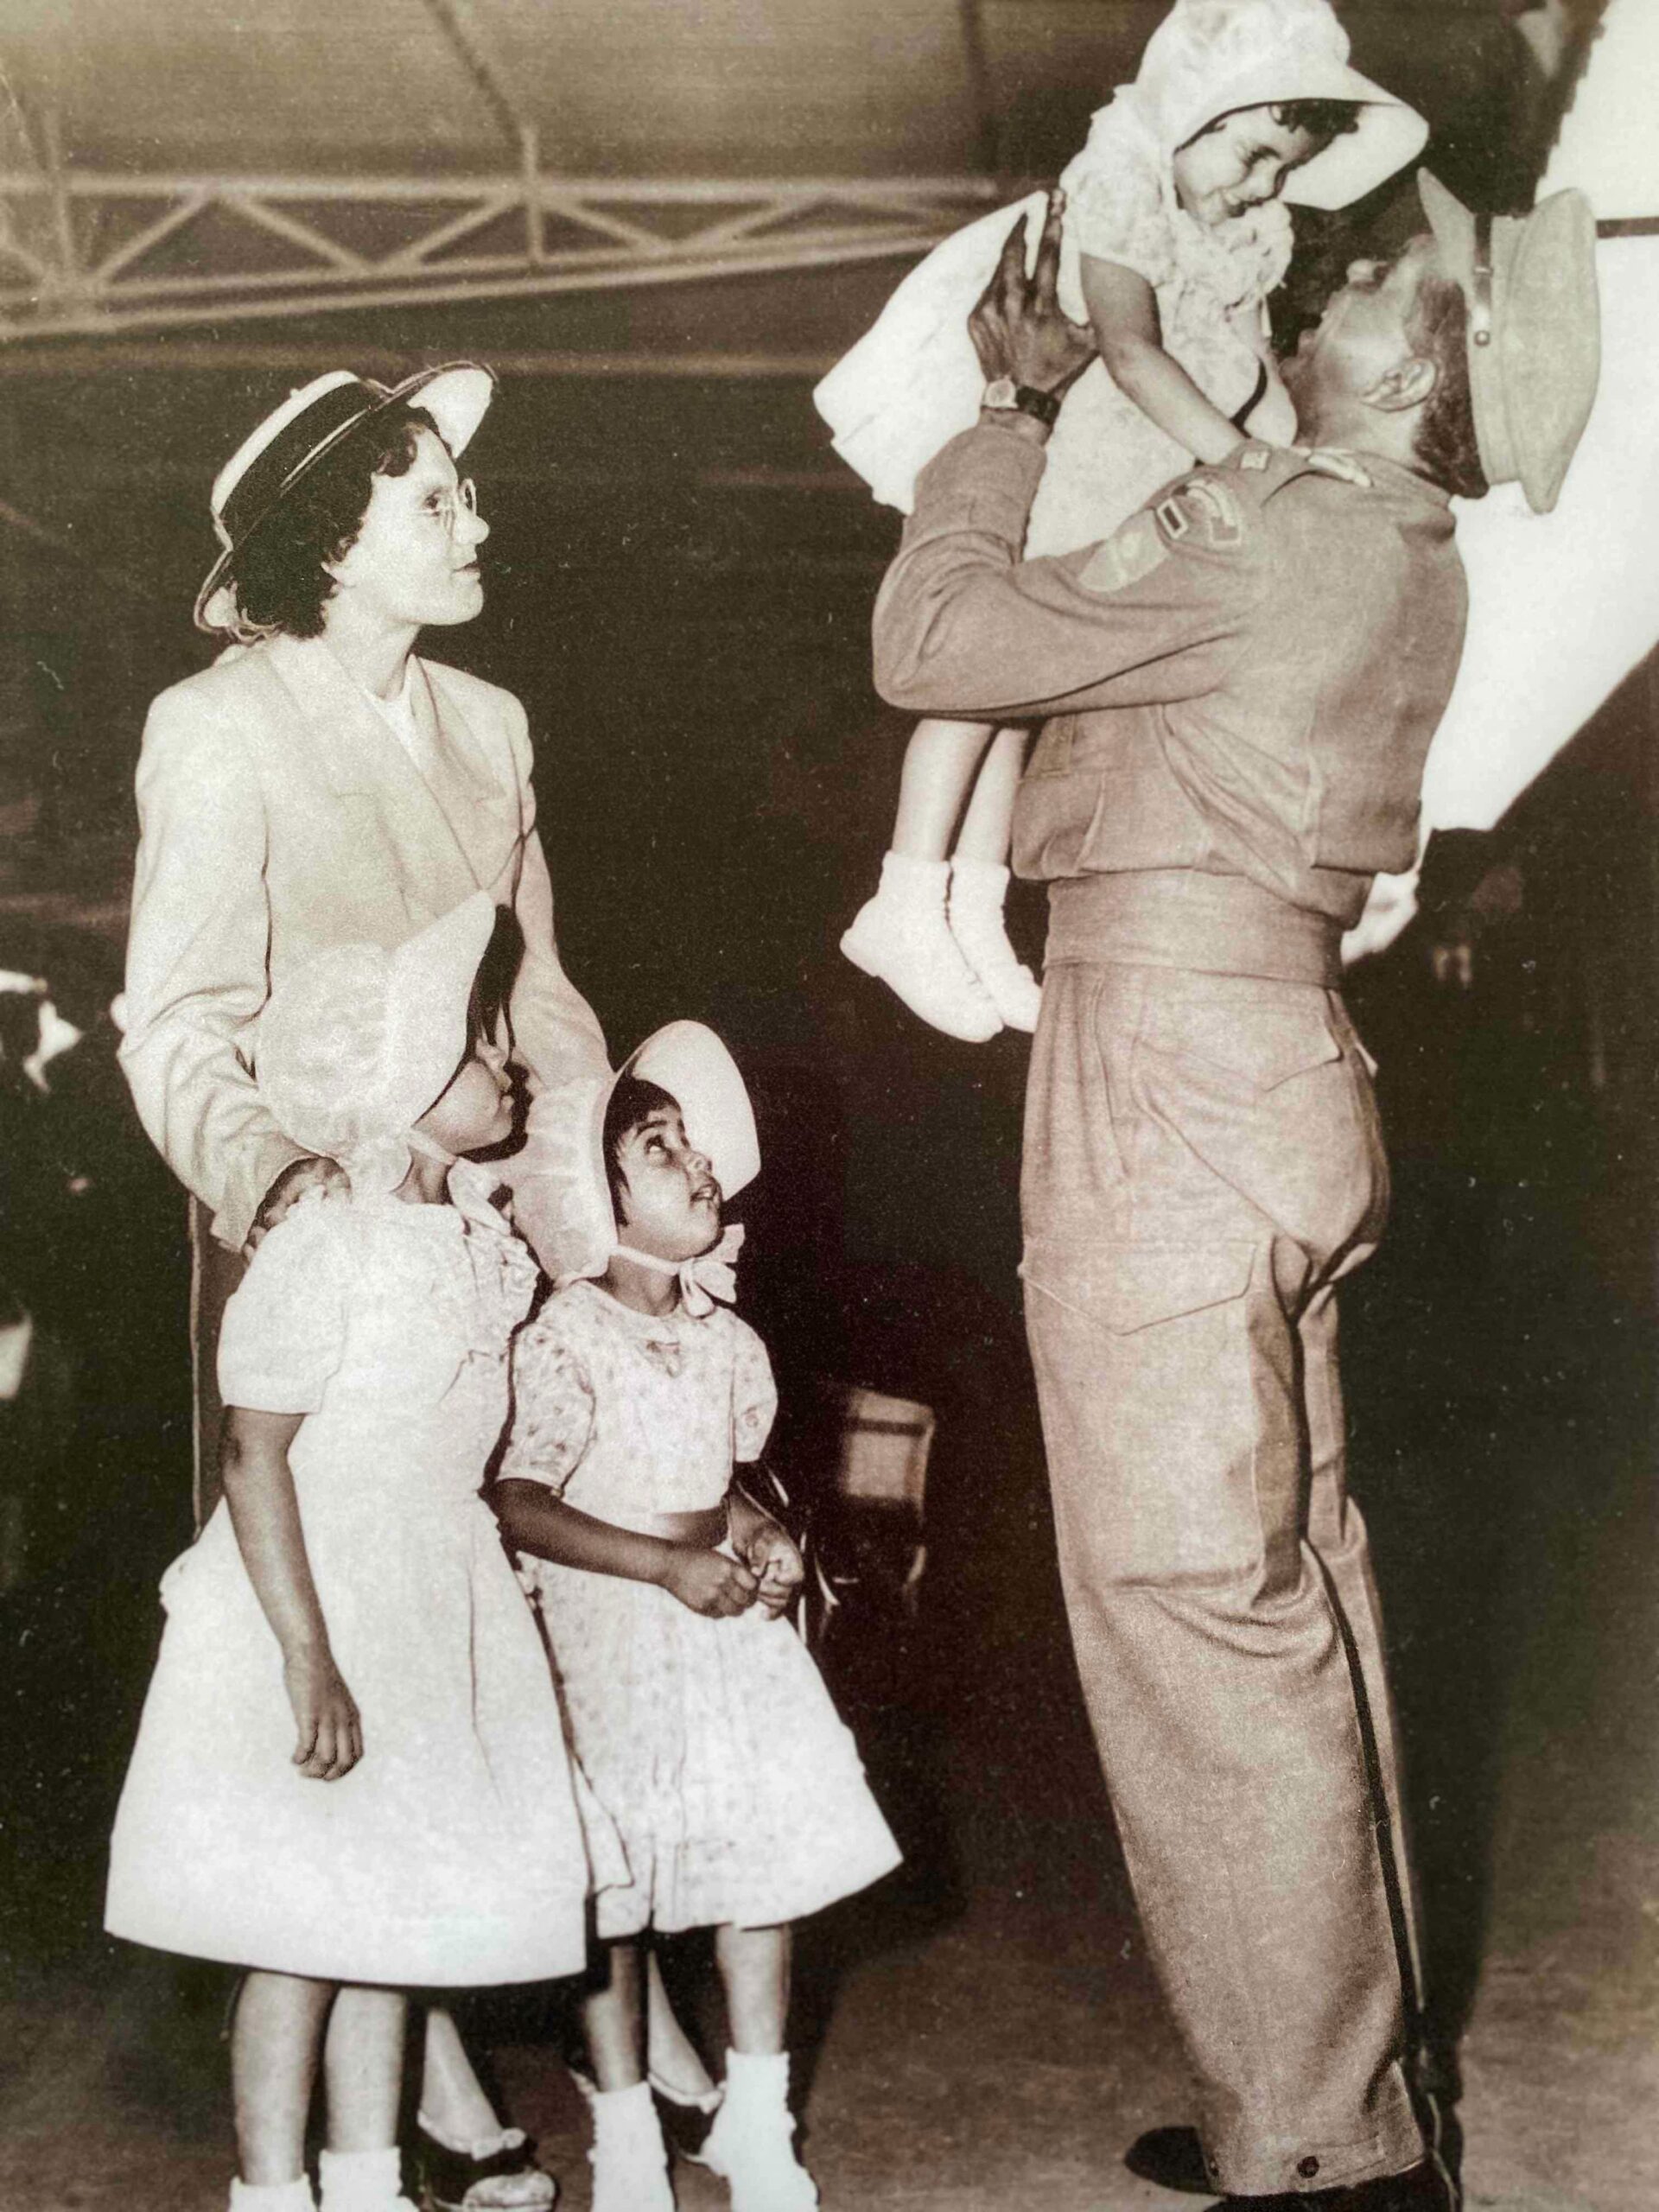 Captain Reginald Saunders MBE arriving home from Korea at Spencer Street Railway Station, with his wife Dorothy and daughters Barbara, Glenda and Dorothy in his arms.